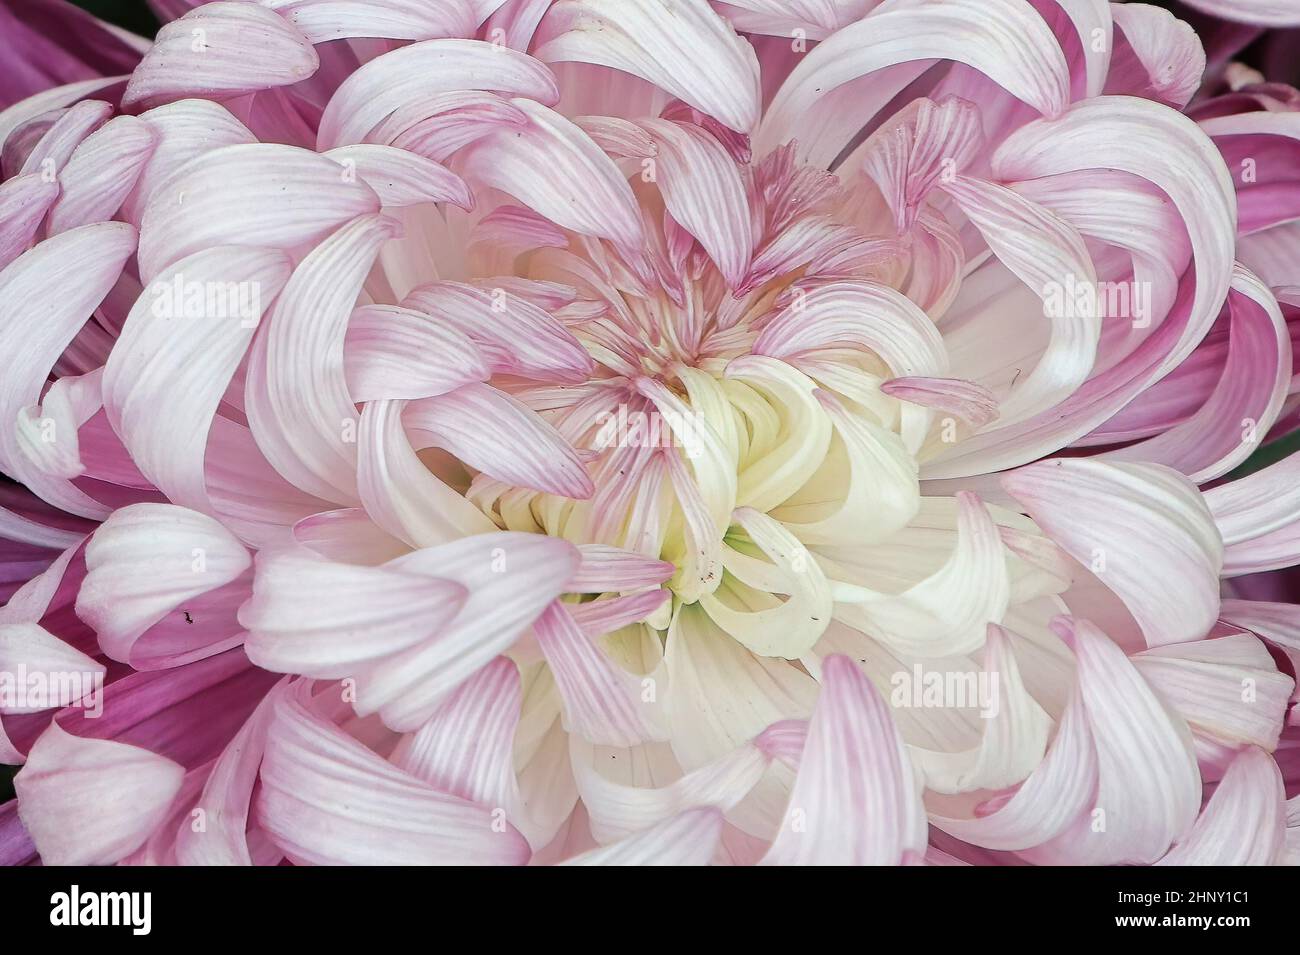 Macro of the center of a pink and white spider mum. Stock Photo